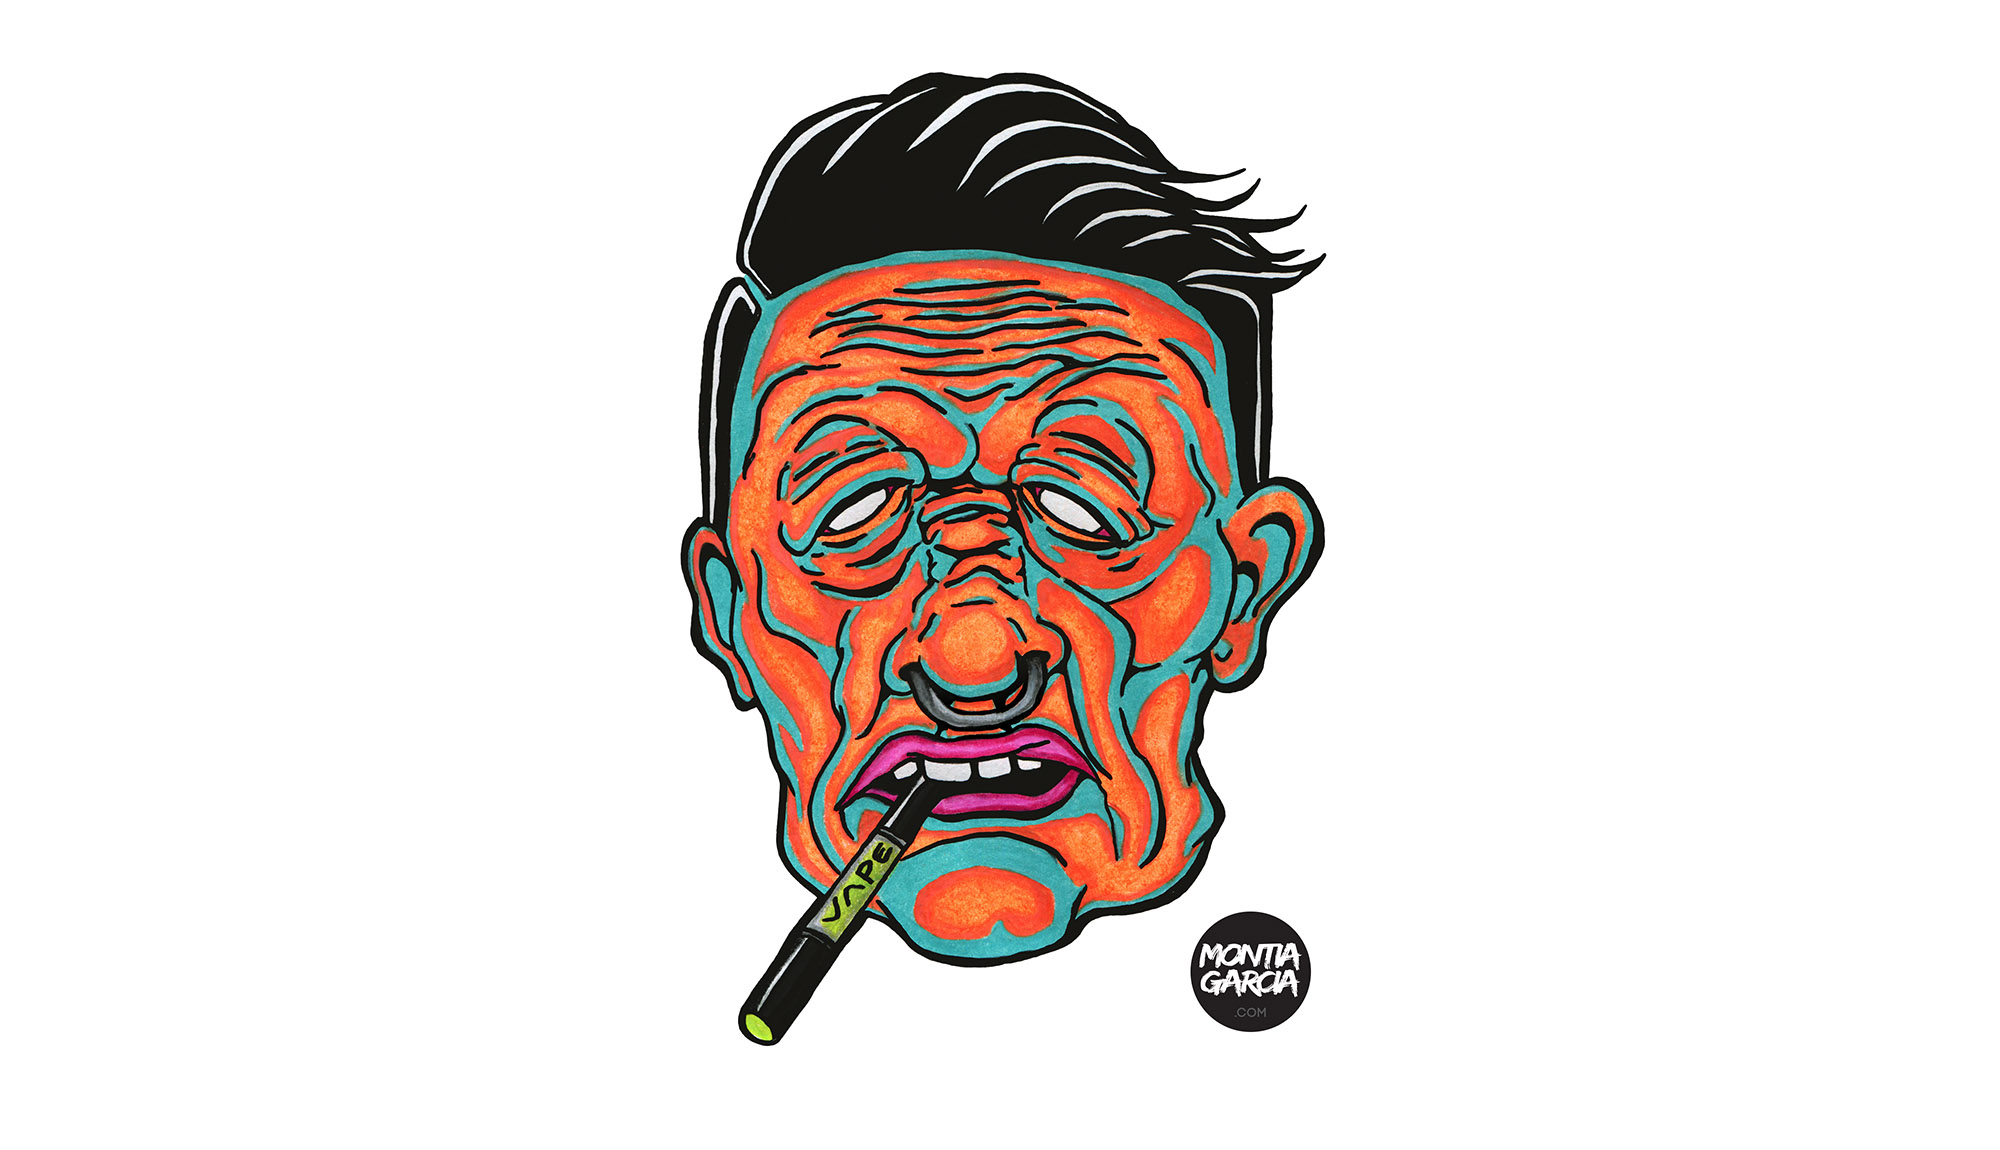 Johnny Vapor - Ink and Colored Pencil drawing by Montia Garcia